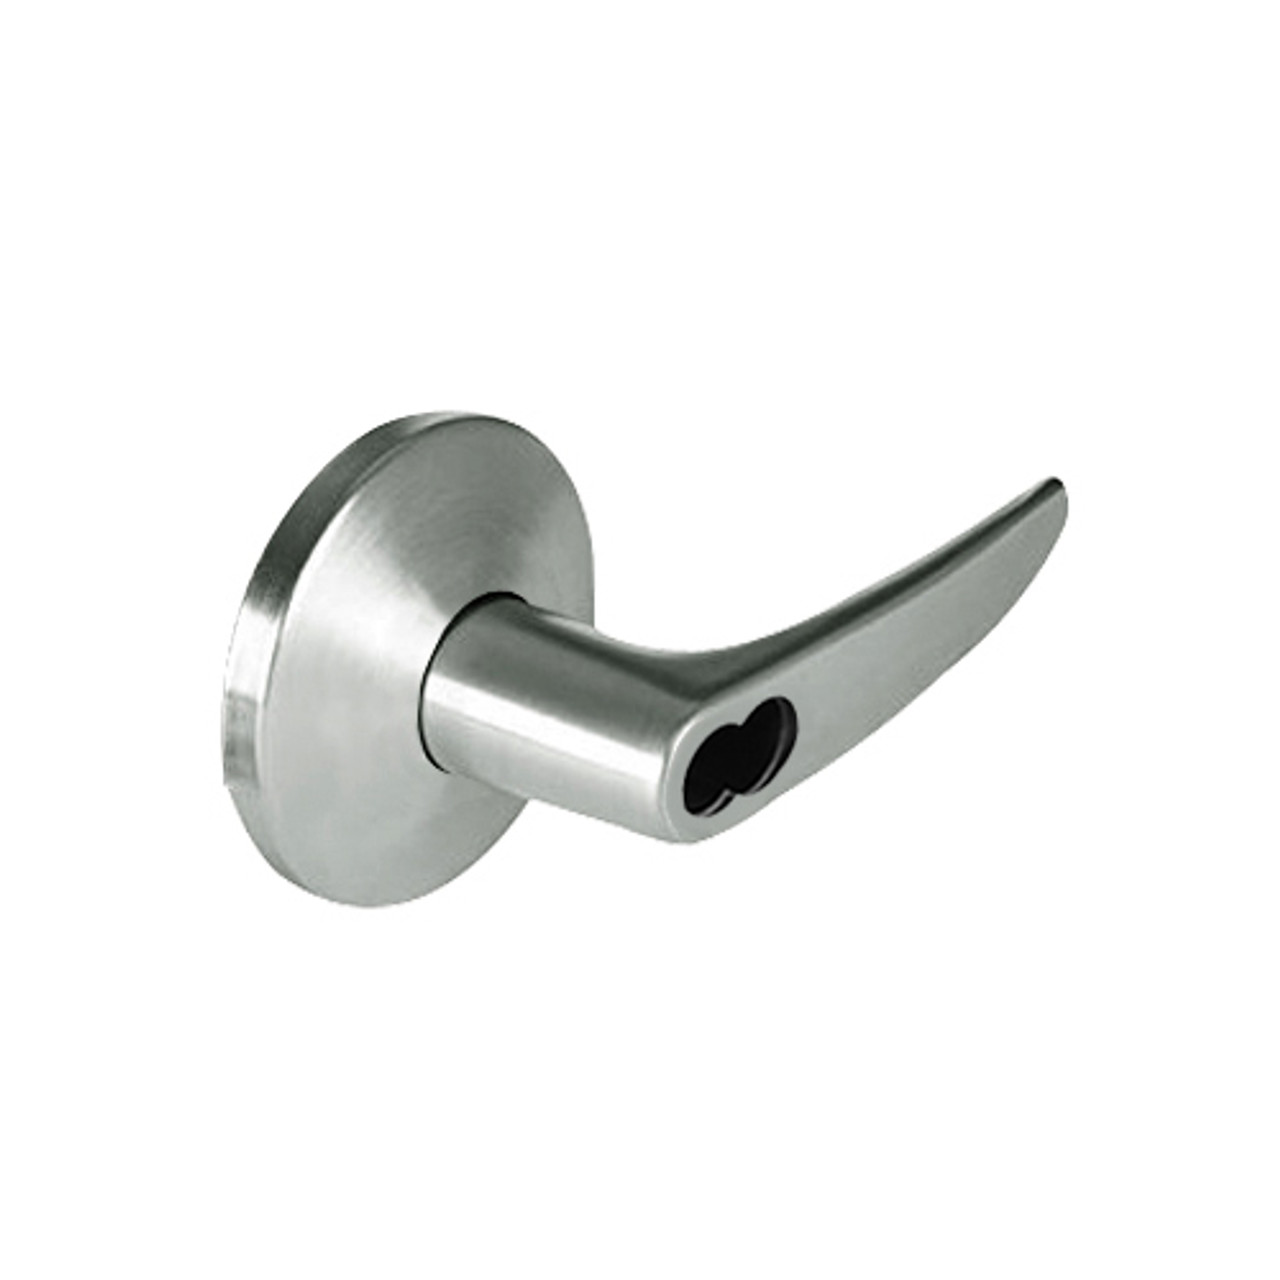 9K37XD16LS3619 Best 9K Series Special Function Cylindrical Lever Locks with Curved without Return Lever Design Accept 7 Pin Best Core in Satin Nickel